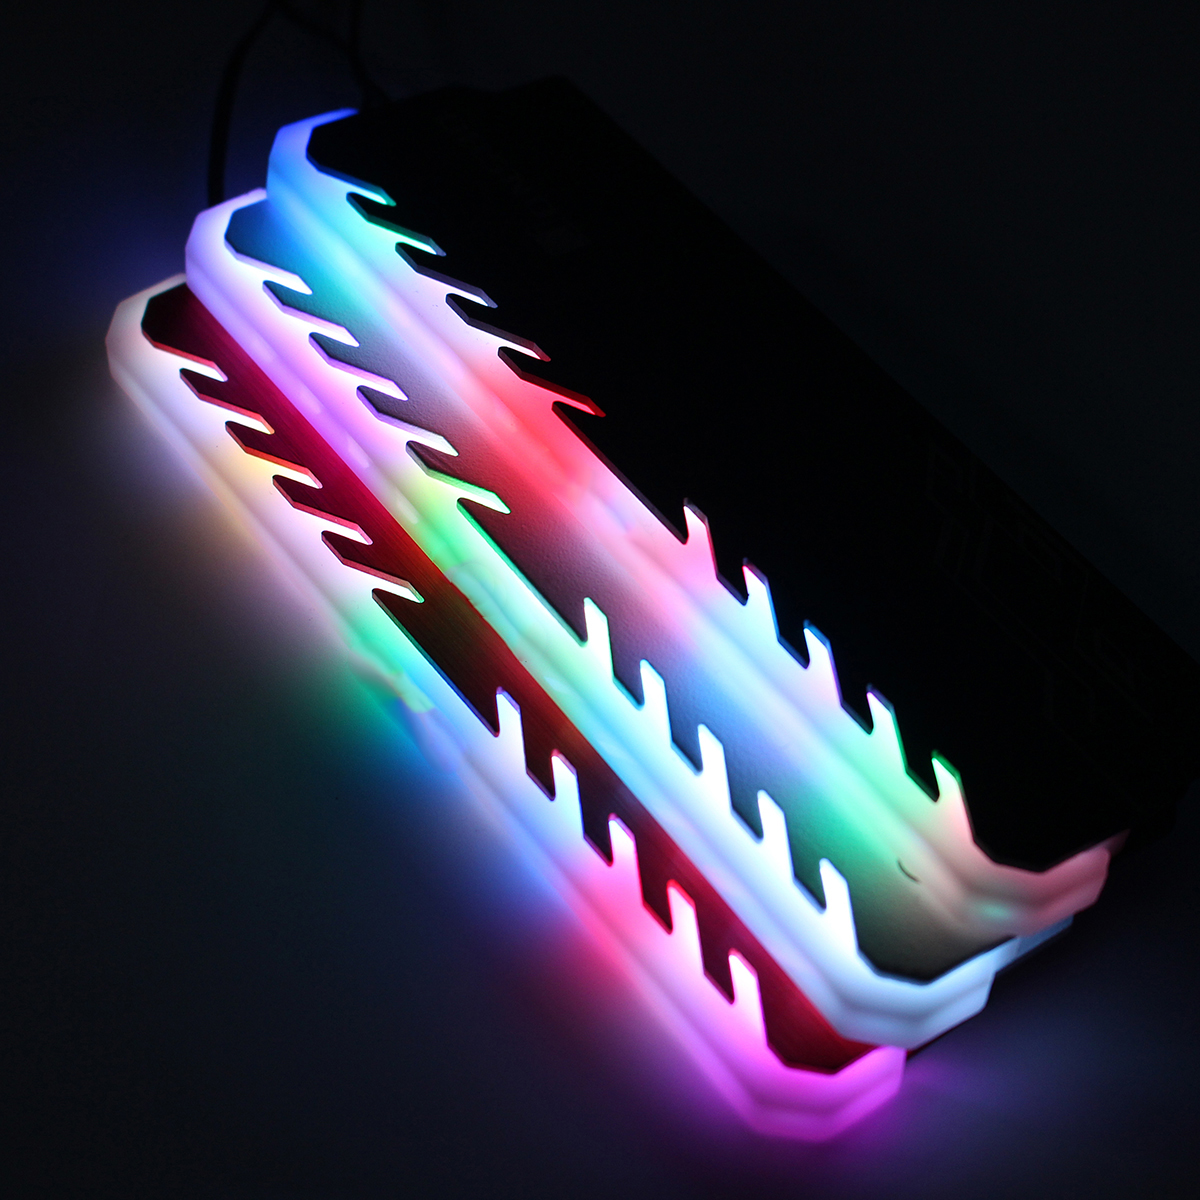 Find Jonsbo NC 3 RGB Colorful Backlit Aluminium Mg Alloy Memory Cooling Clamp Heatsink Computer Memory Cooler for Sale on Gipsybee.com with cryptocurrencies